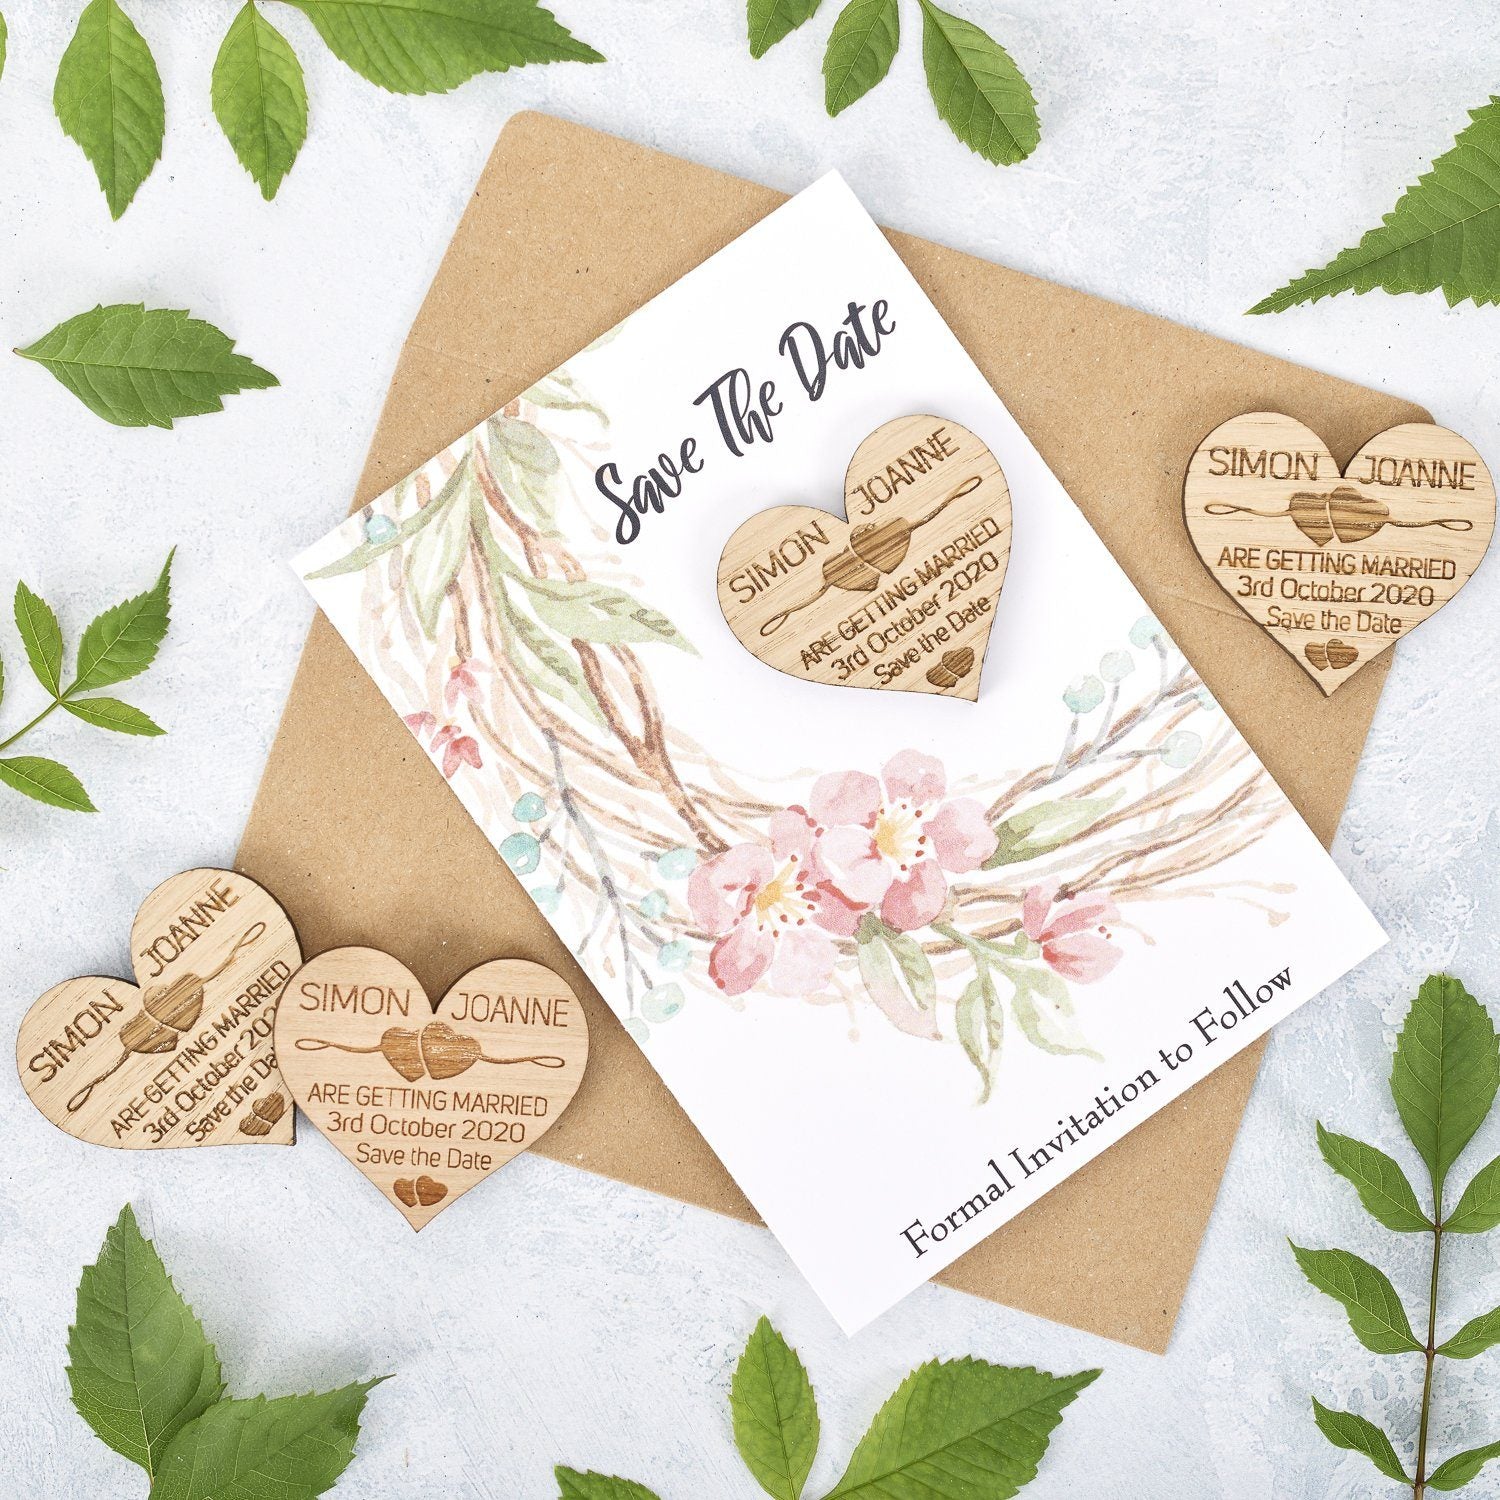 Save The Date Magnet With Cards - Save The Date Magnet Wooden Rustic & Cards - Two Hearts